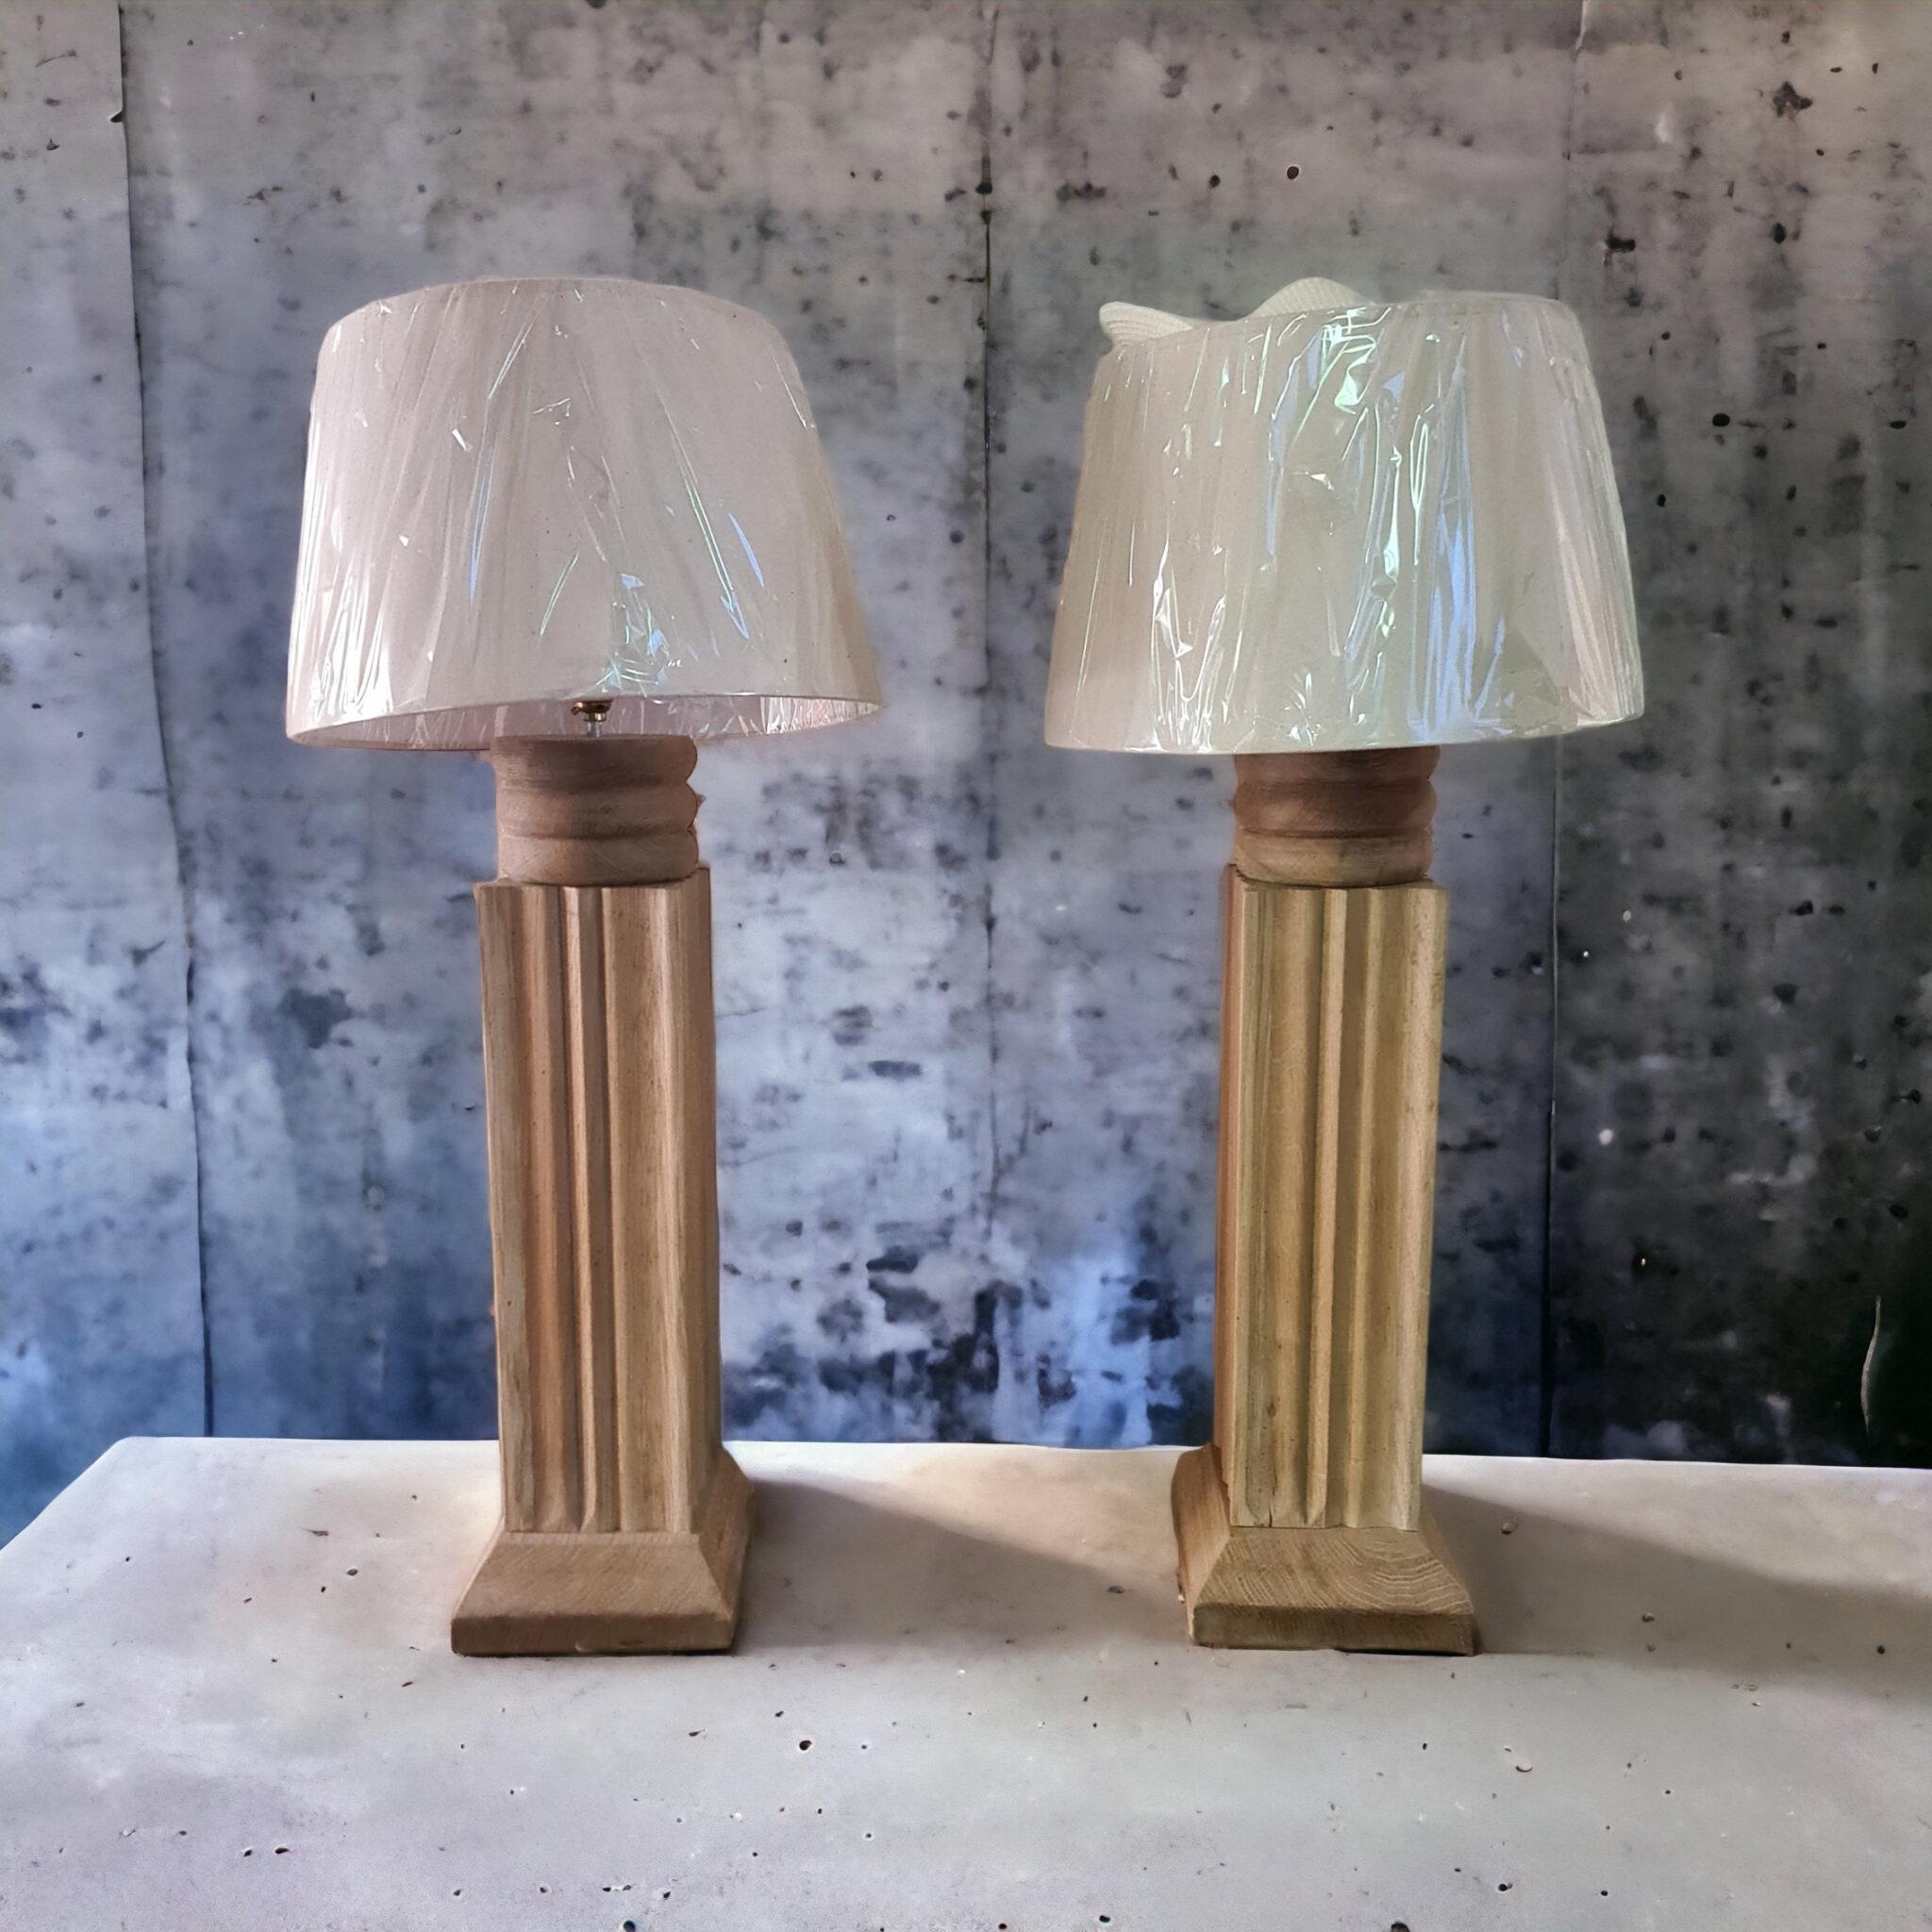 Pair of Art Deco Style Solid Oak Lamps Circa 1940

Highlight your interior with this stunning pair of solid oak lamps, a true masterpiece of 1940s Art Deco design. These lamps embody the timeless elegance and retro charm of this iconic era.

Main